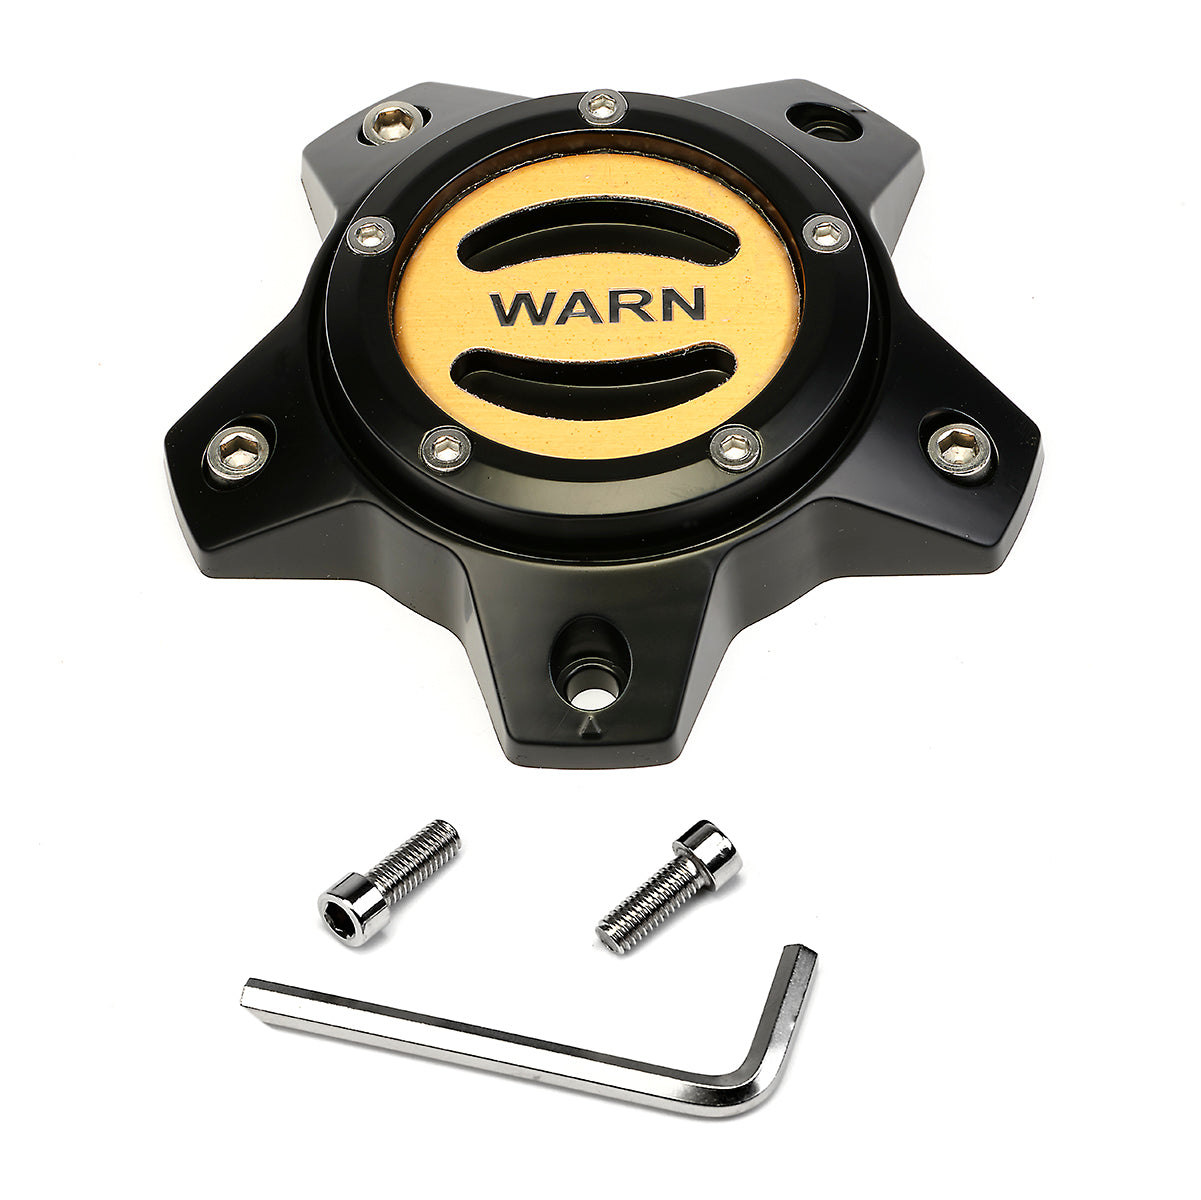 REPLACEMENT Gold Center Cap for Black WARN EPIC 6-lug wheels;